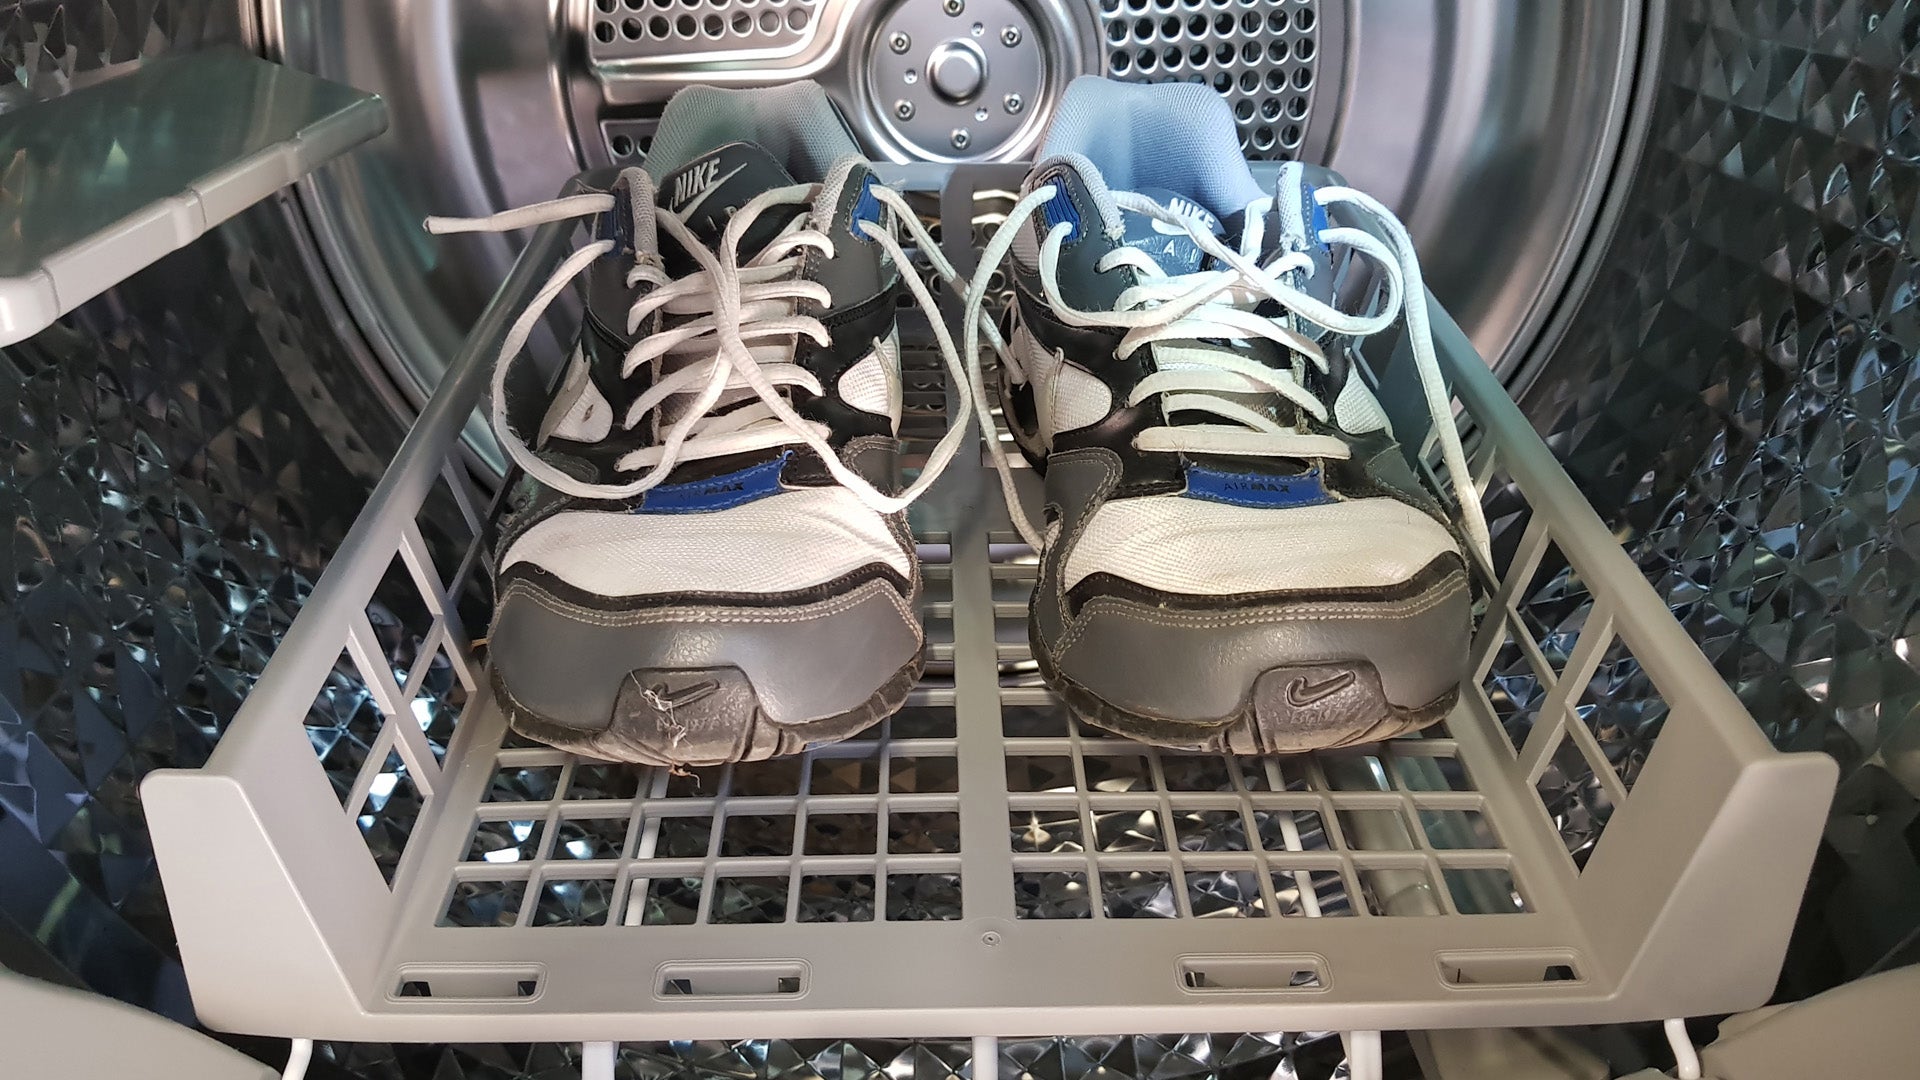 Sneakers drying inside Samsung tumble dryer with shoe rack.